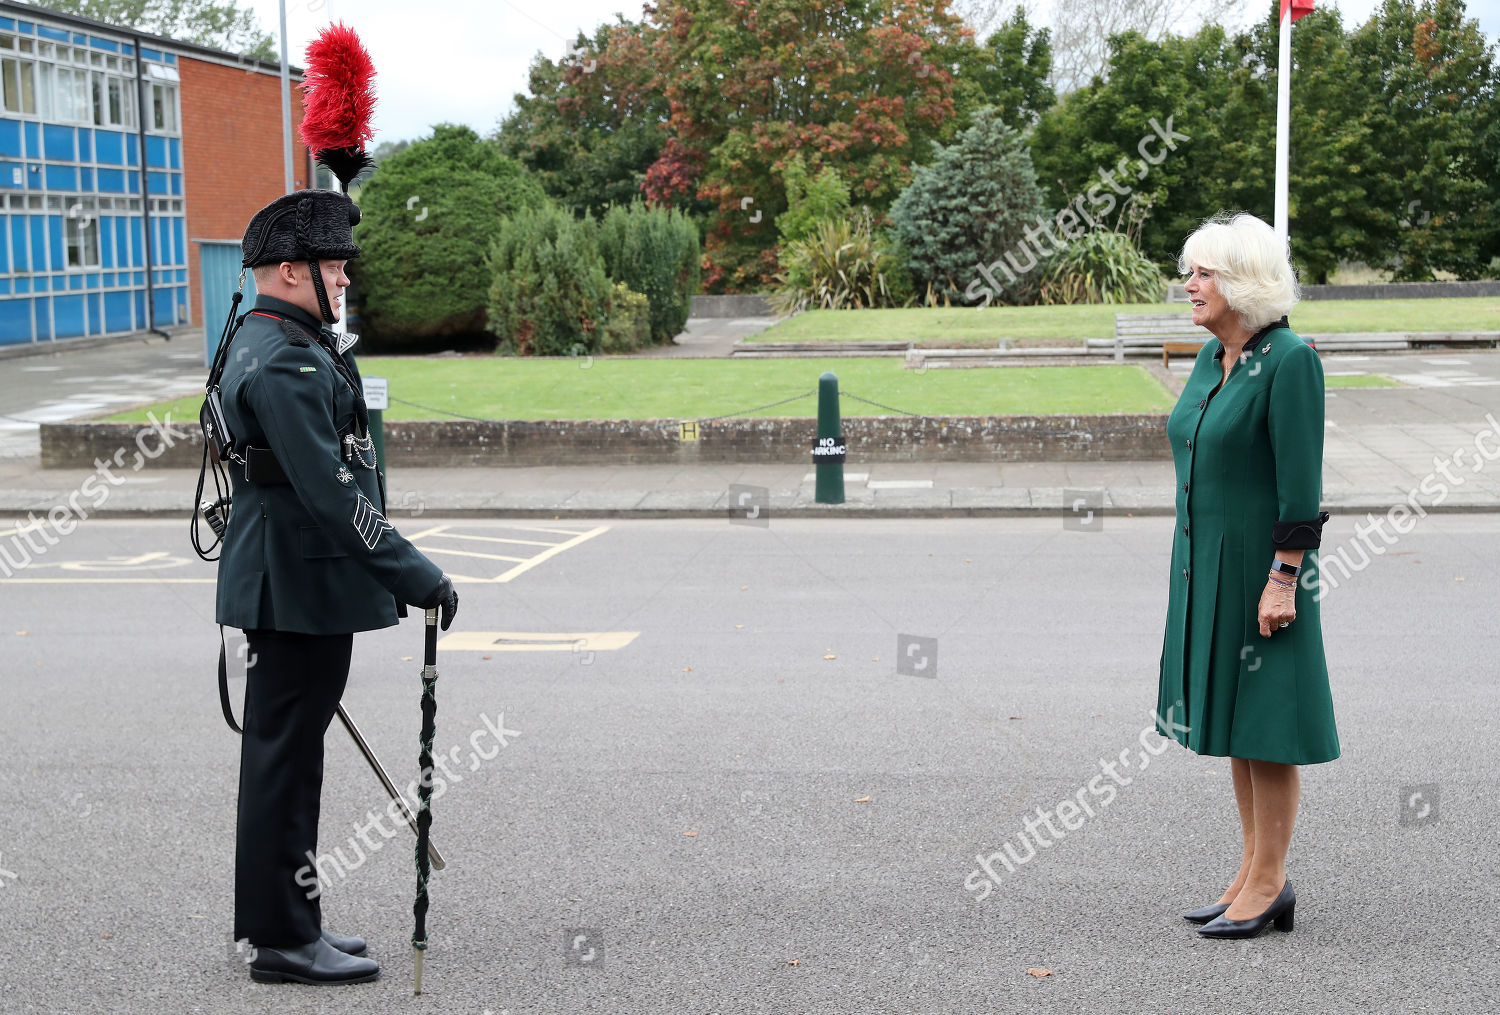 CASA REAL BRITÁNICA - Página 87 The-duchess-of-cornwall-visits-1st-battalion-the-rifles-beachley-barracks-chepstow-wales-shutterstock-editorial-10768638d